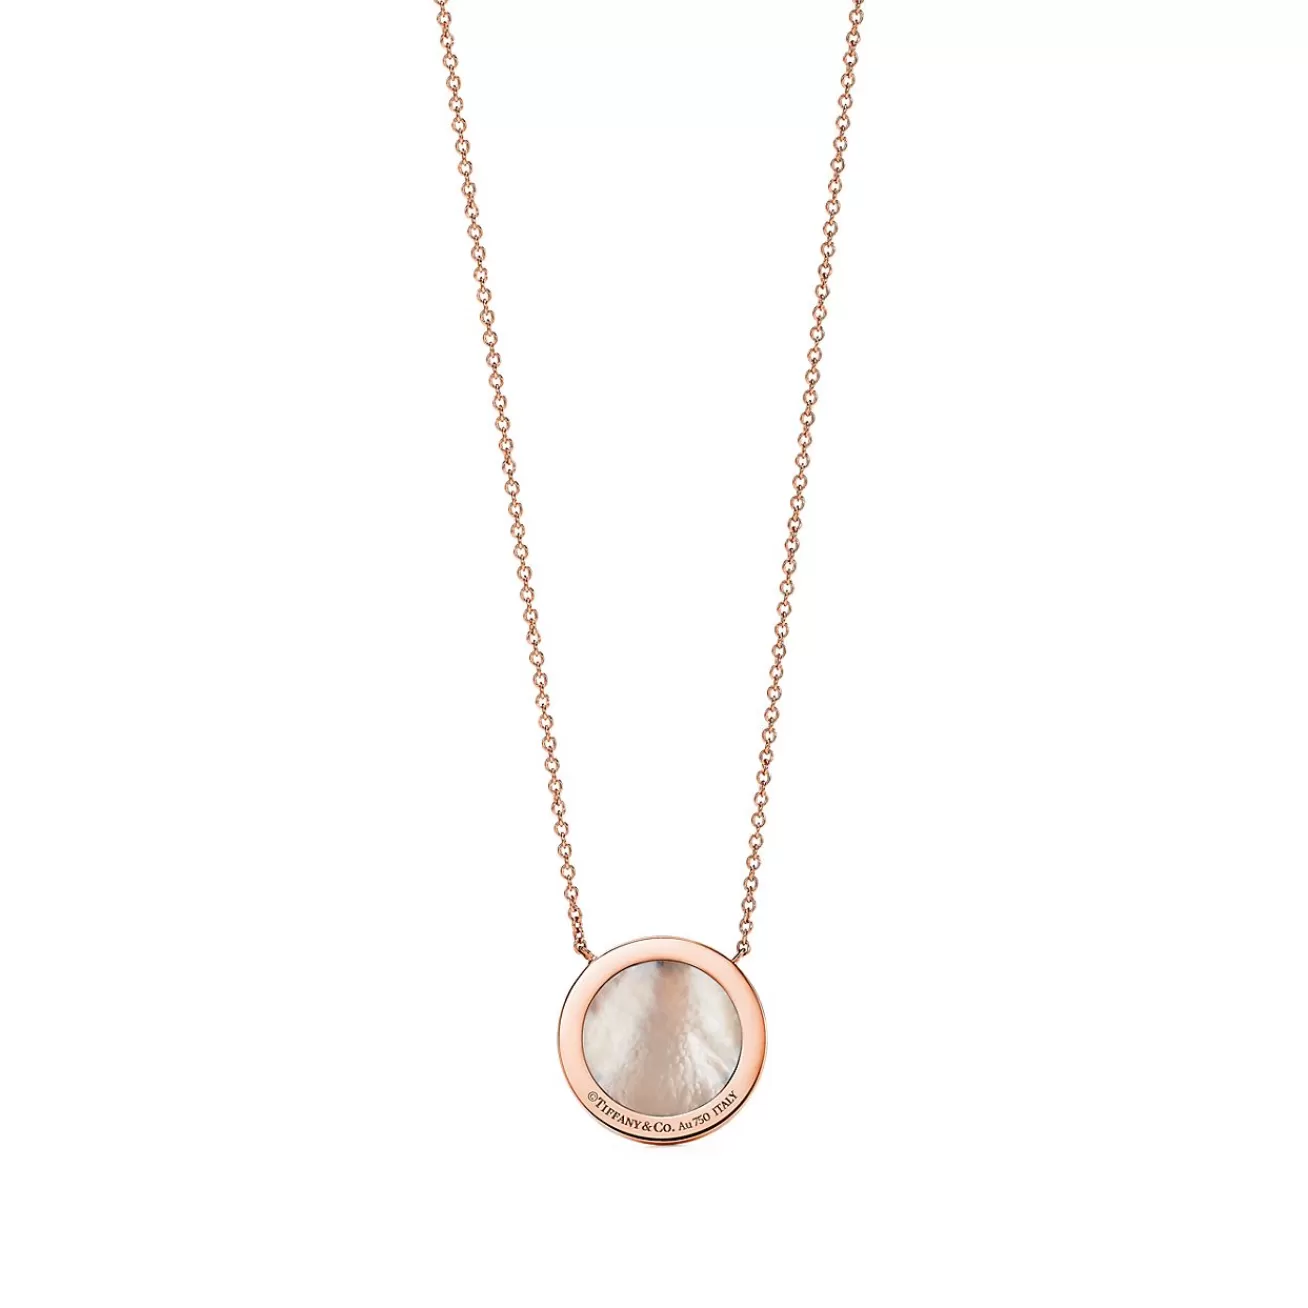 Tiffany & Co. Tiffany T diamond and mother-of-pearl circle pendant in 18k rose gold. | ^ Necklaces & Pendants | Gifts for Her